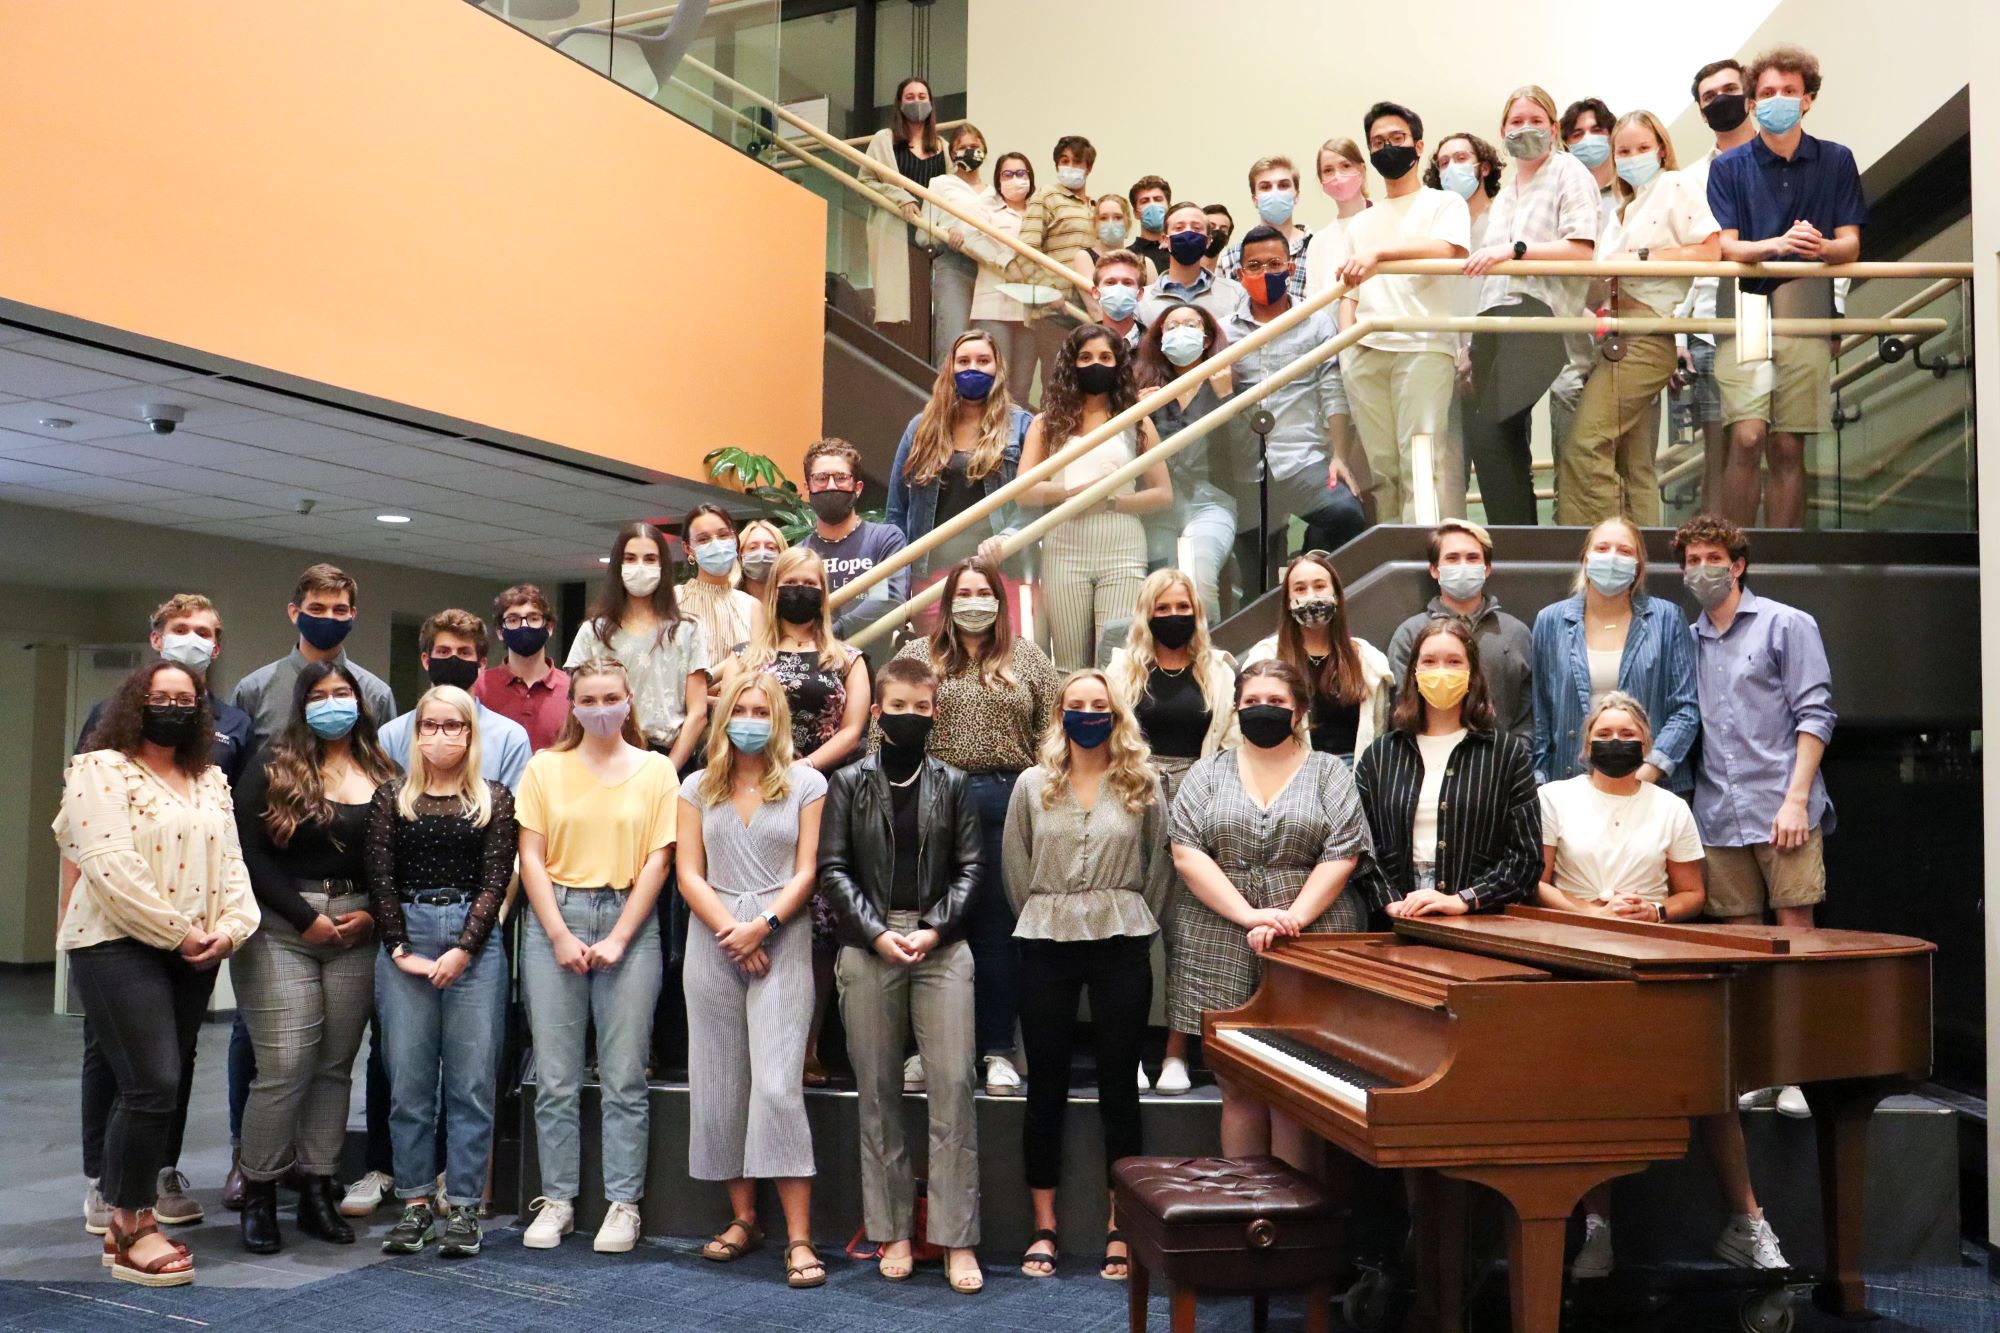 Group photo of the 2021 Student Congress members.